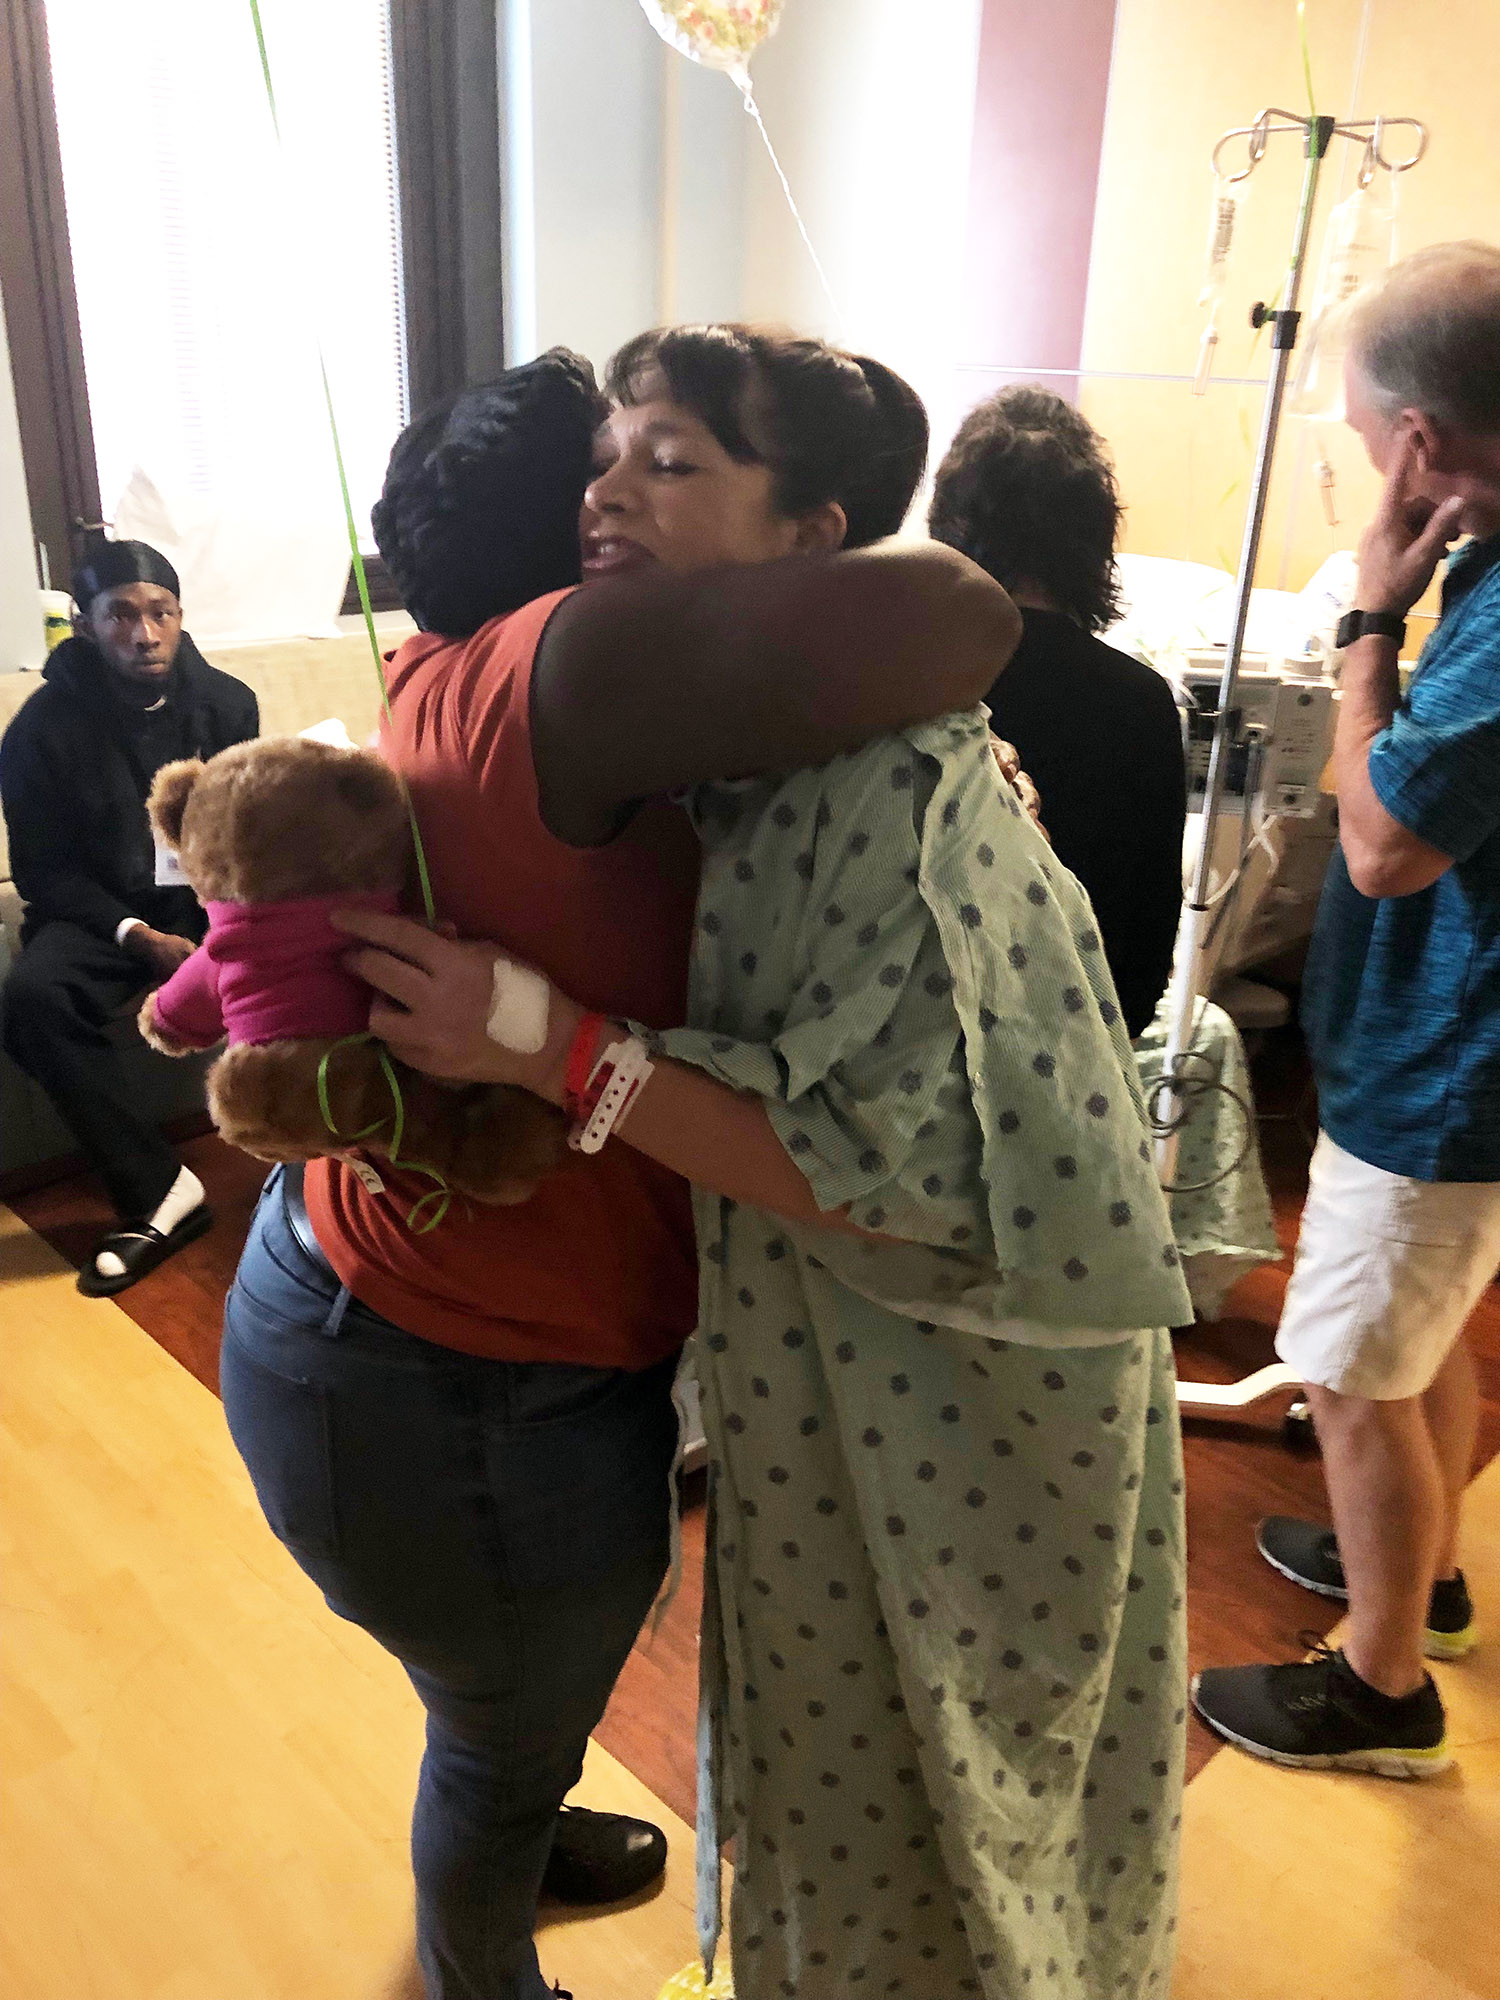 PHOTO: Kidney donor Starr Gardy, pictured hugging Lashonda Pugh in the hospital, donated her kidney to Pugh's son after seeing a plea for a donor written on the back of his mother's car.